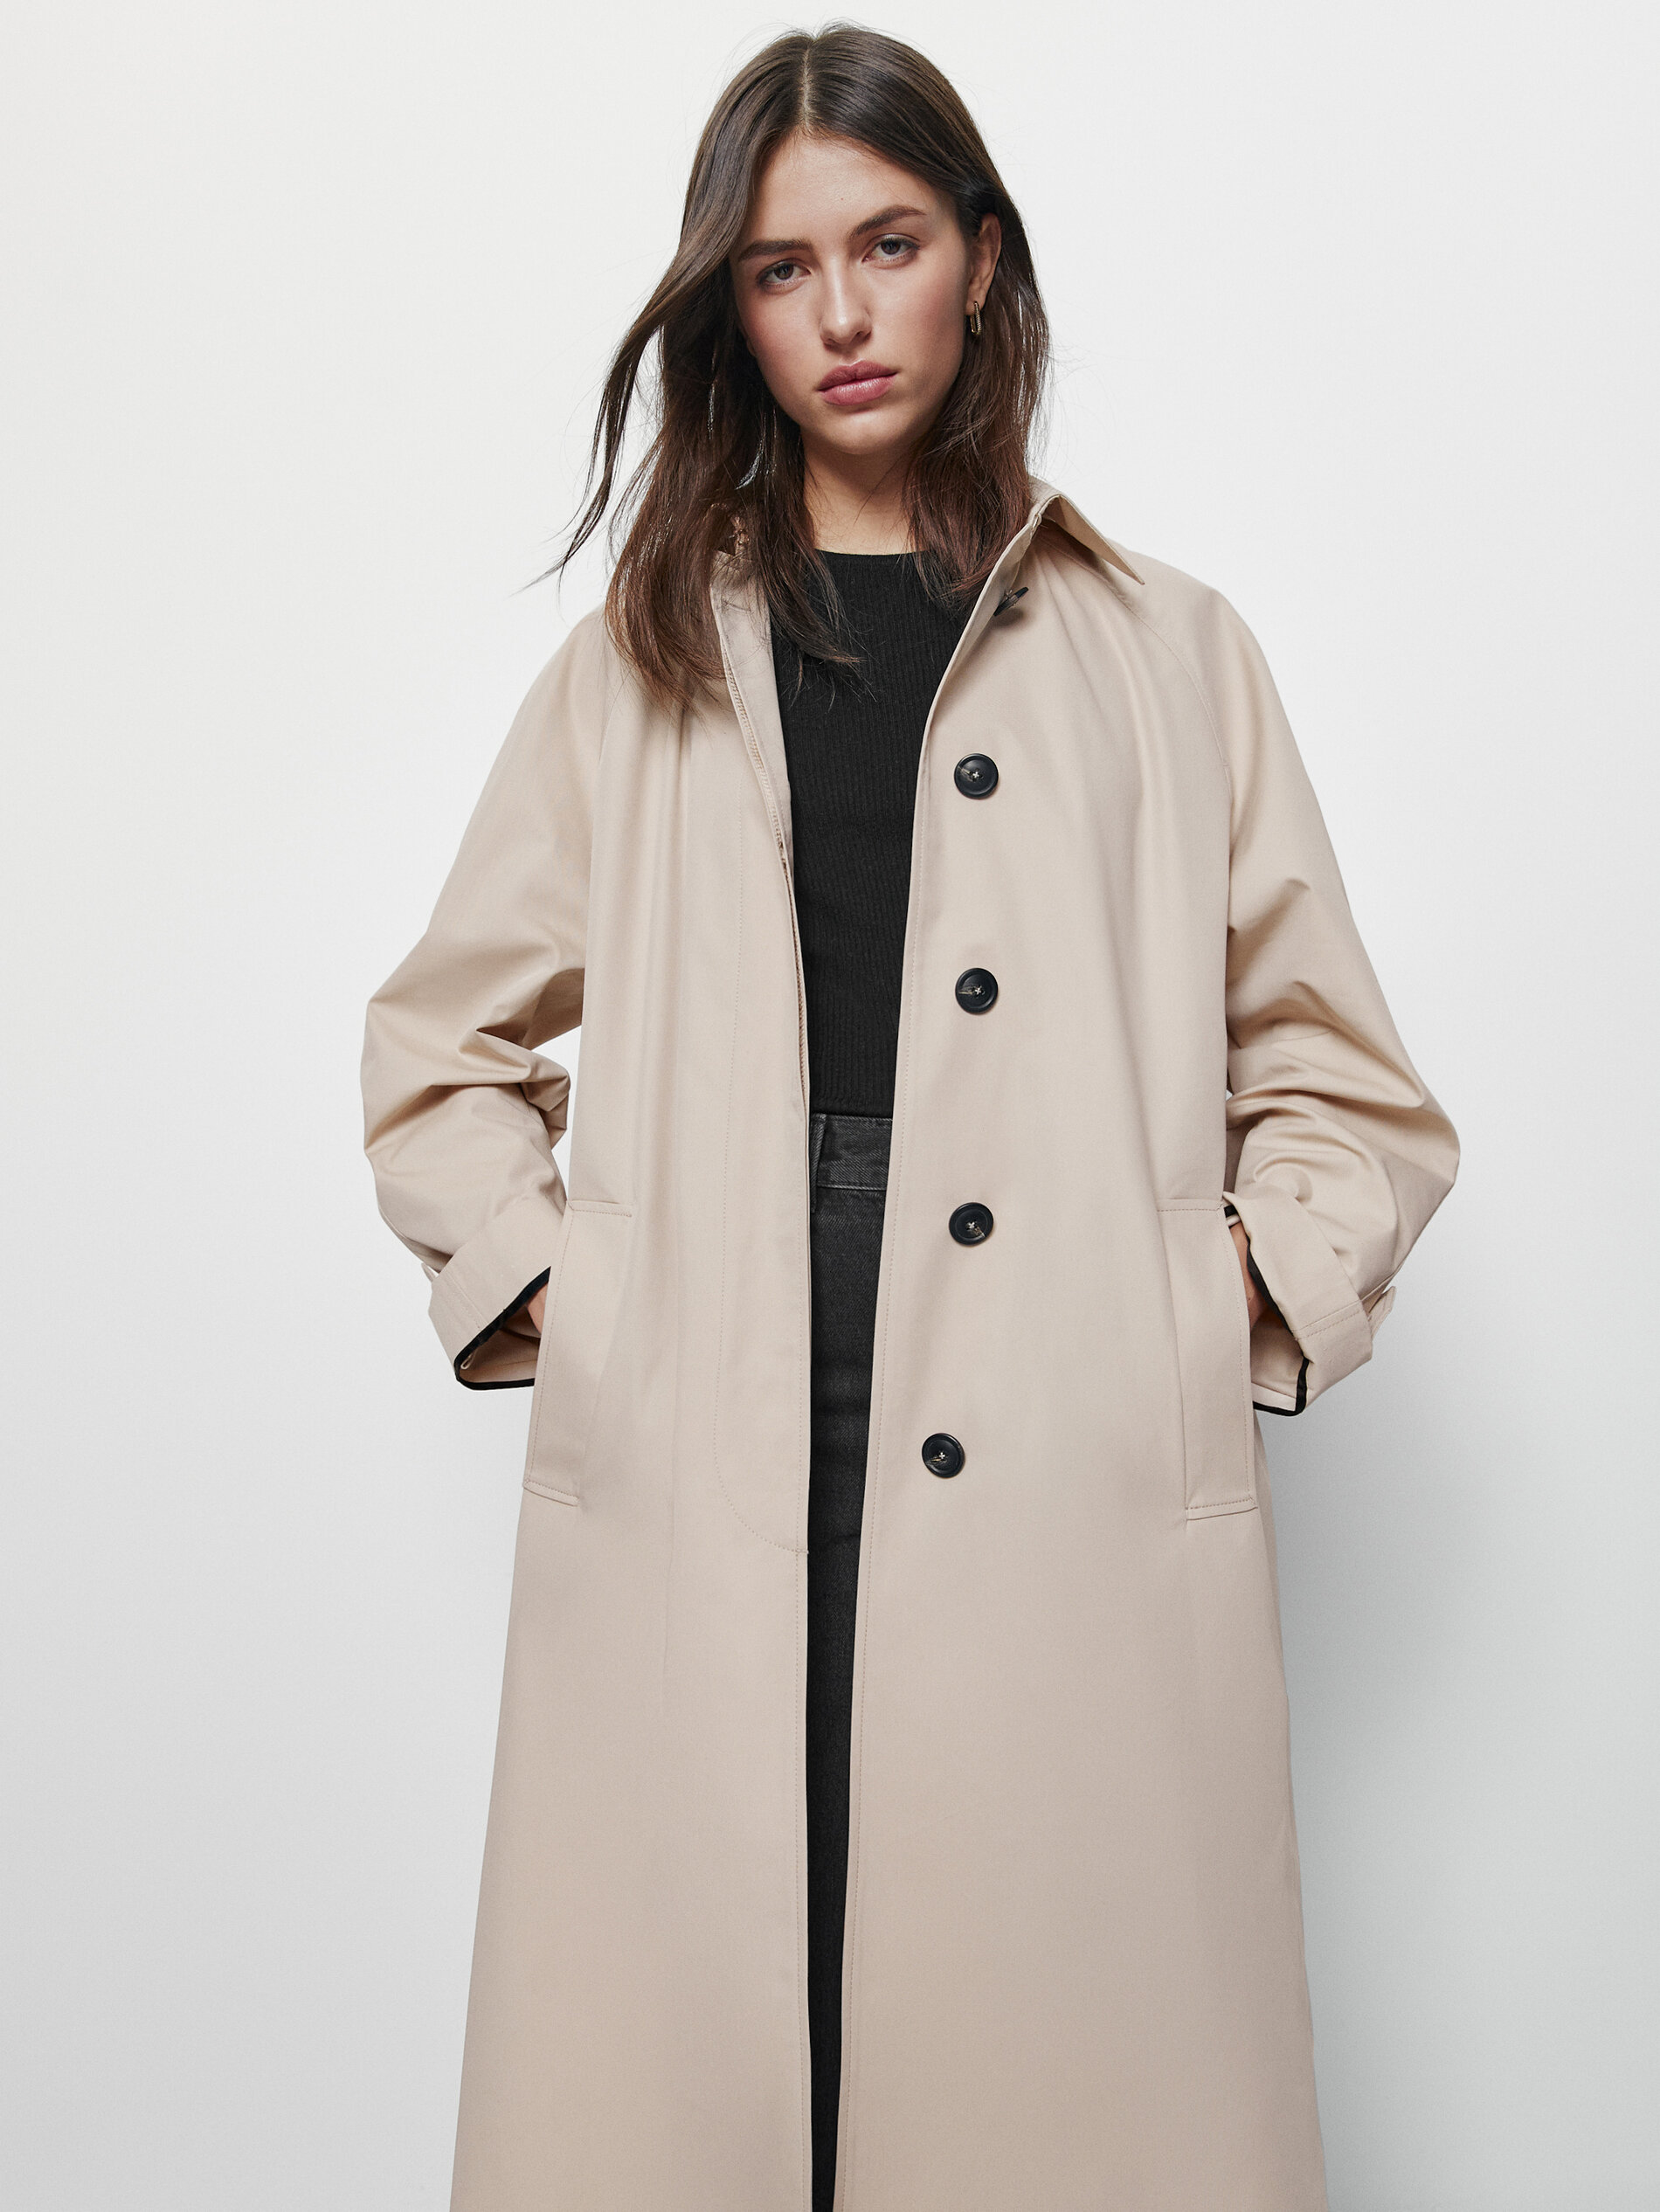 Massimo Dutti Trench Coat With Side Vents - Big Apple Buddy